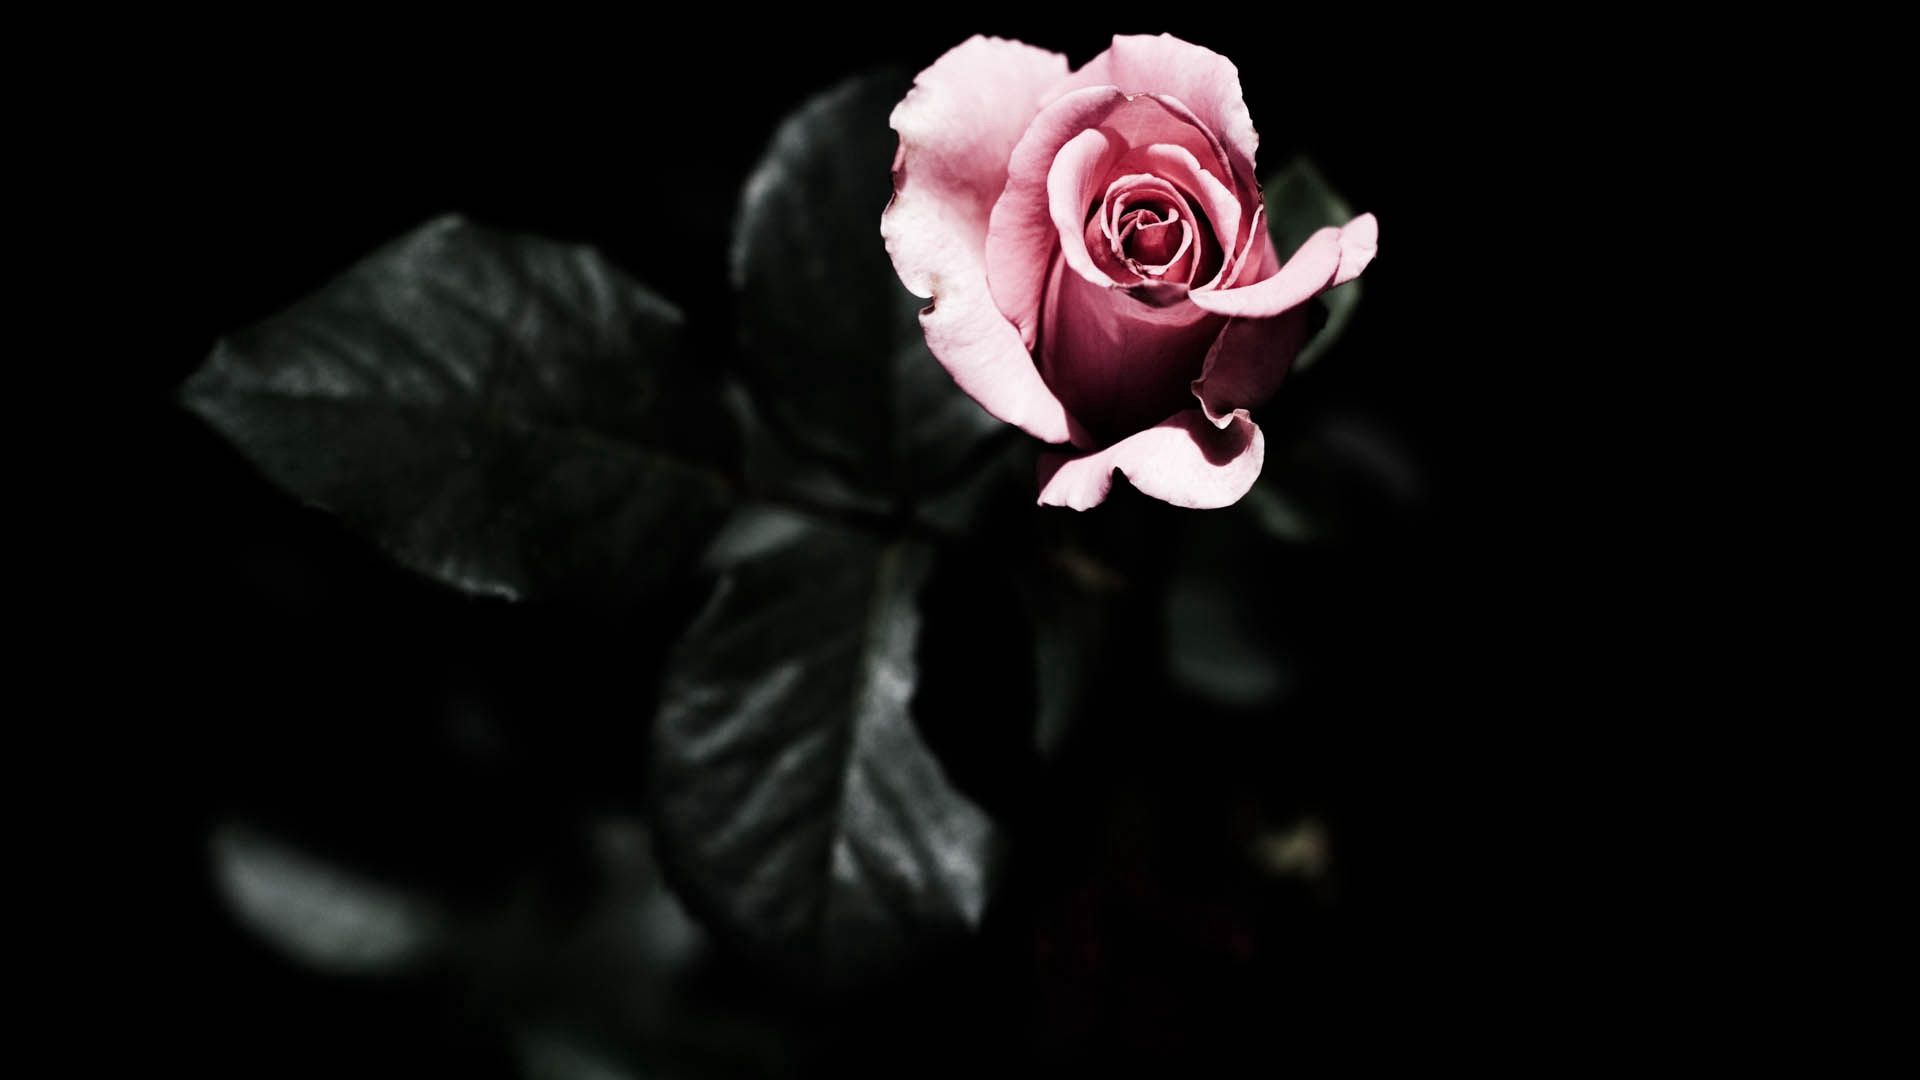 85288 download wallpaper rose, flowers, plant, rose flower, petals screensavers and pictures for free